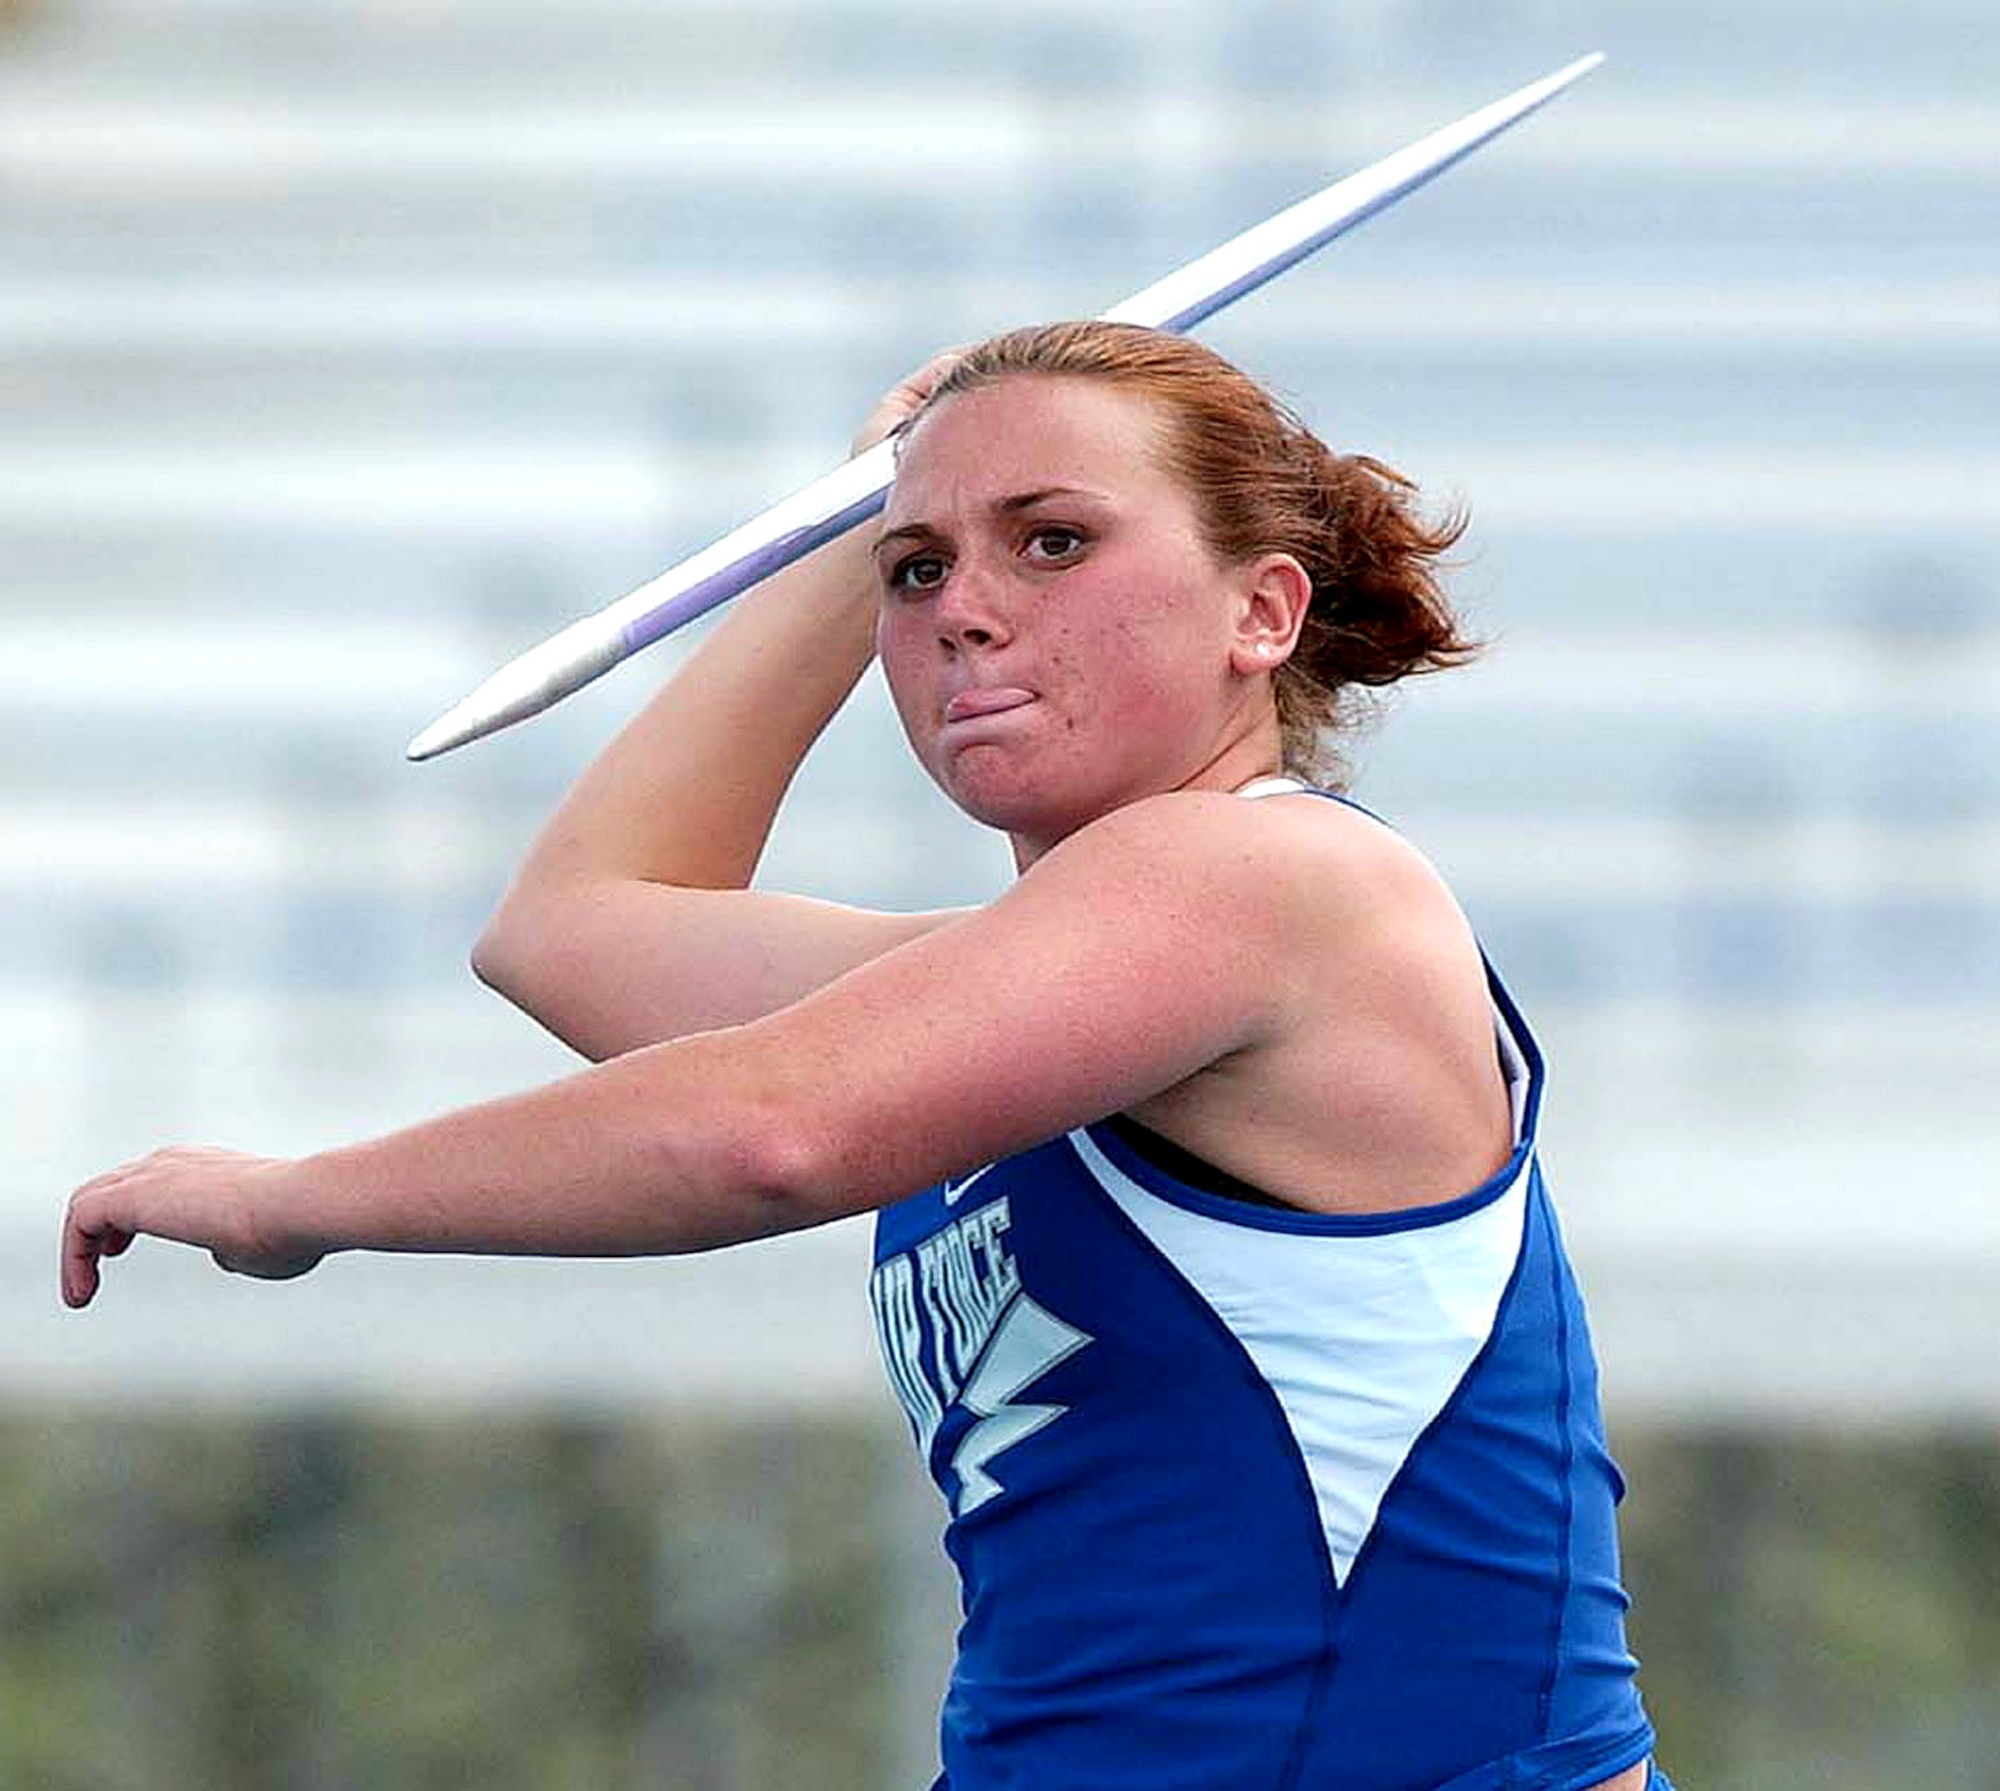 Dana Pounds successfully defended her javelin title at the NCAA Track and Field Championships in Sacramento, Calif., on June 9. Defeating the runner-up by nearly 12 feet, the Lexington, Ky., native claimed her second national title in as many years. (Air Force file photo) 
